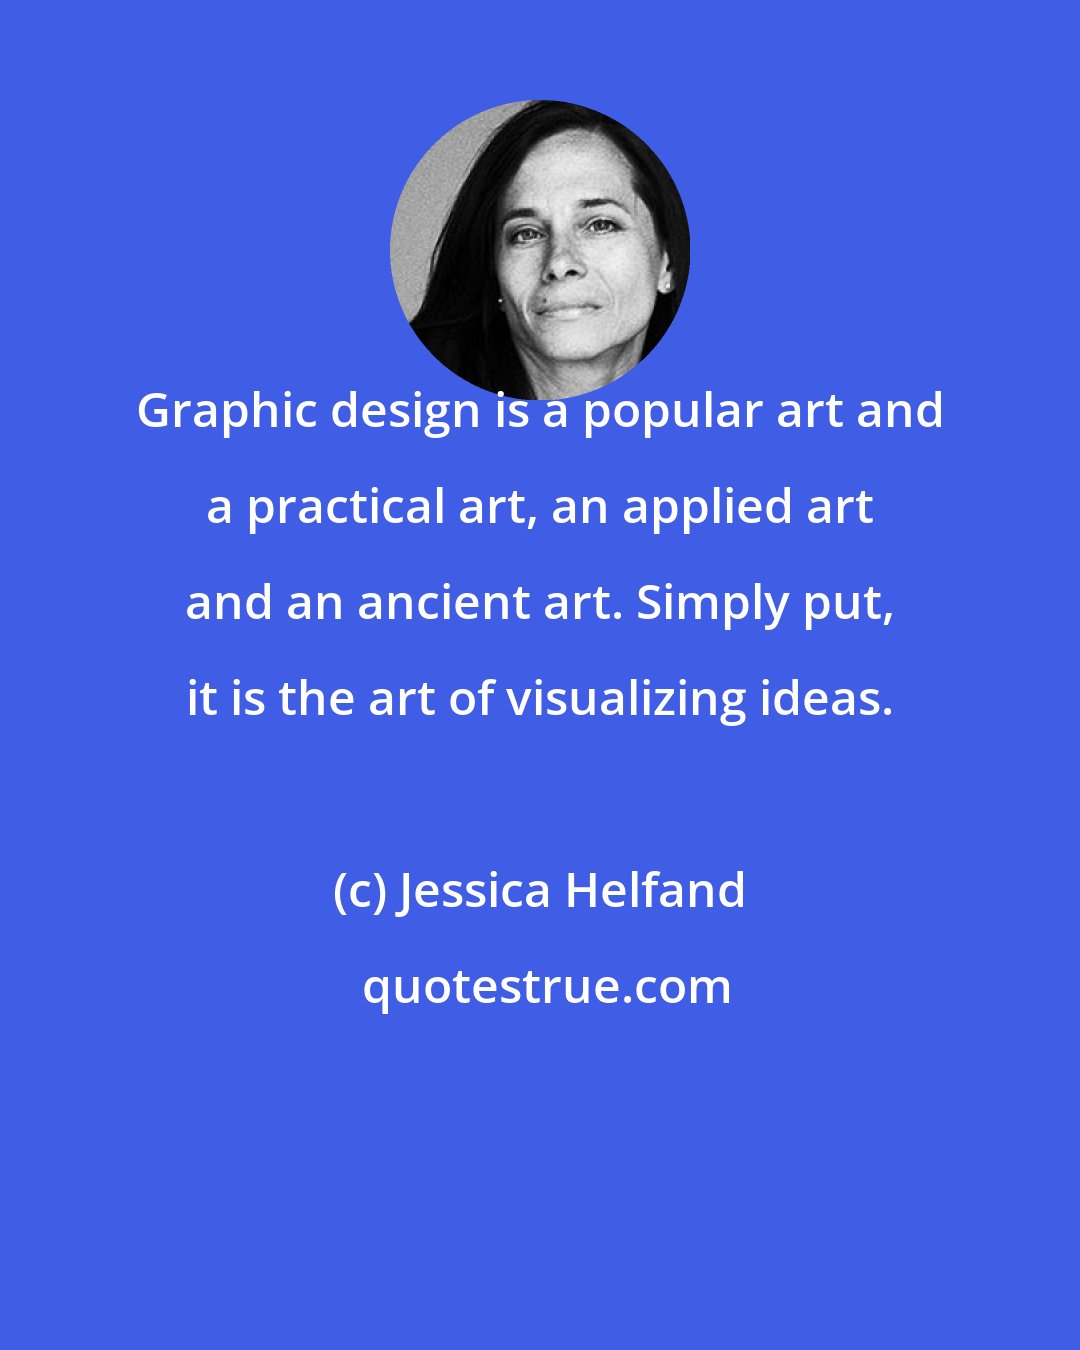 Jessica Helfand: Graphic design is a popular art and a practical art, an applied art and an ancient art. Simply put, it is the art of visualizing ideas.